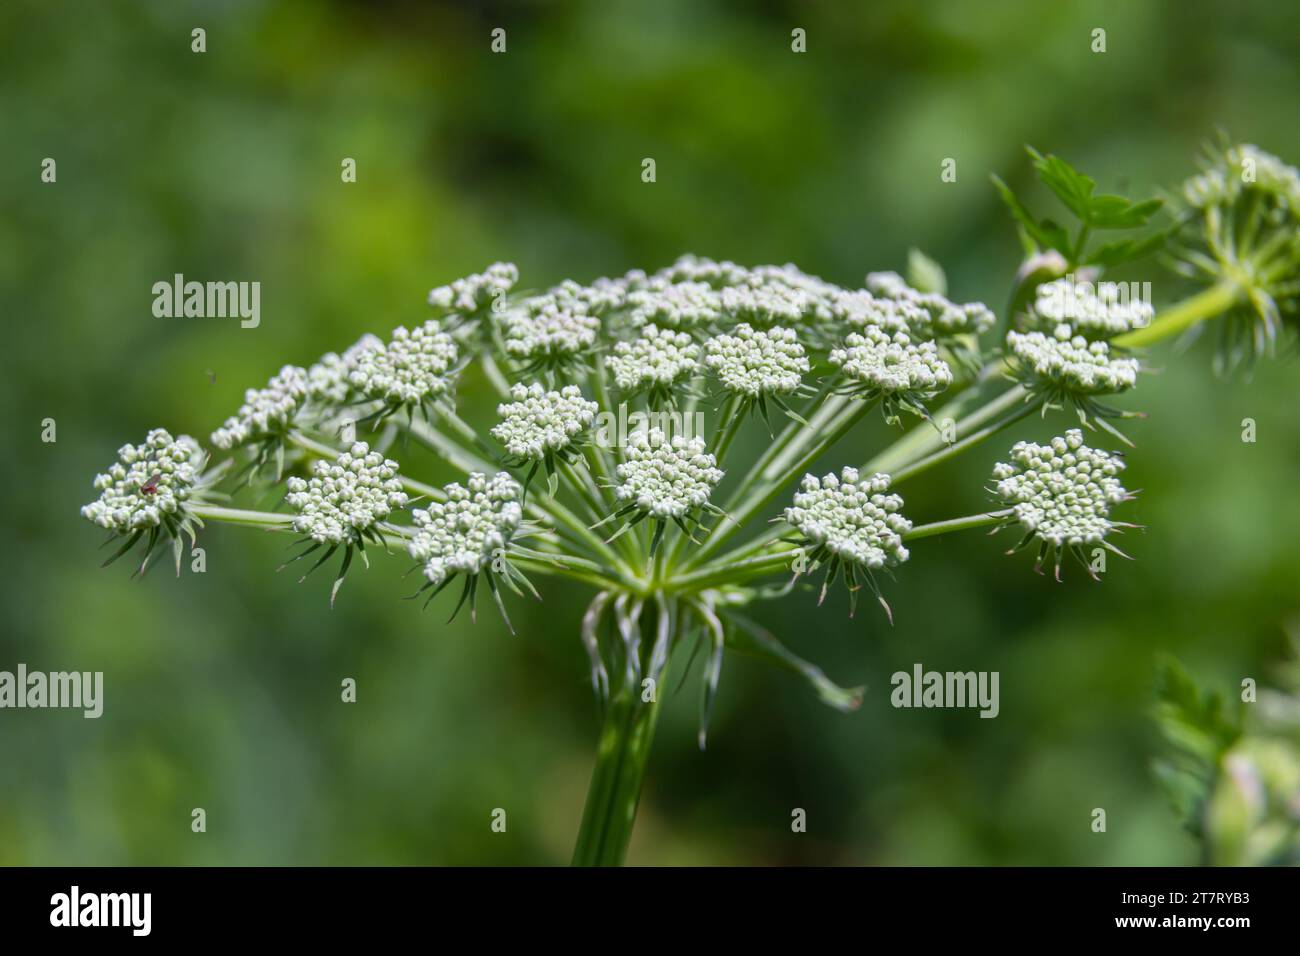 Flowering black cumin, Bunium bulbocastanum in the natural environment on a green background. Stock Photo